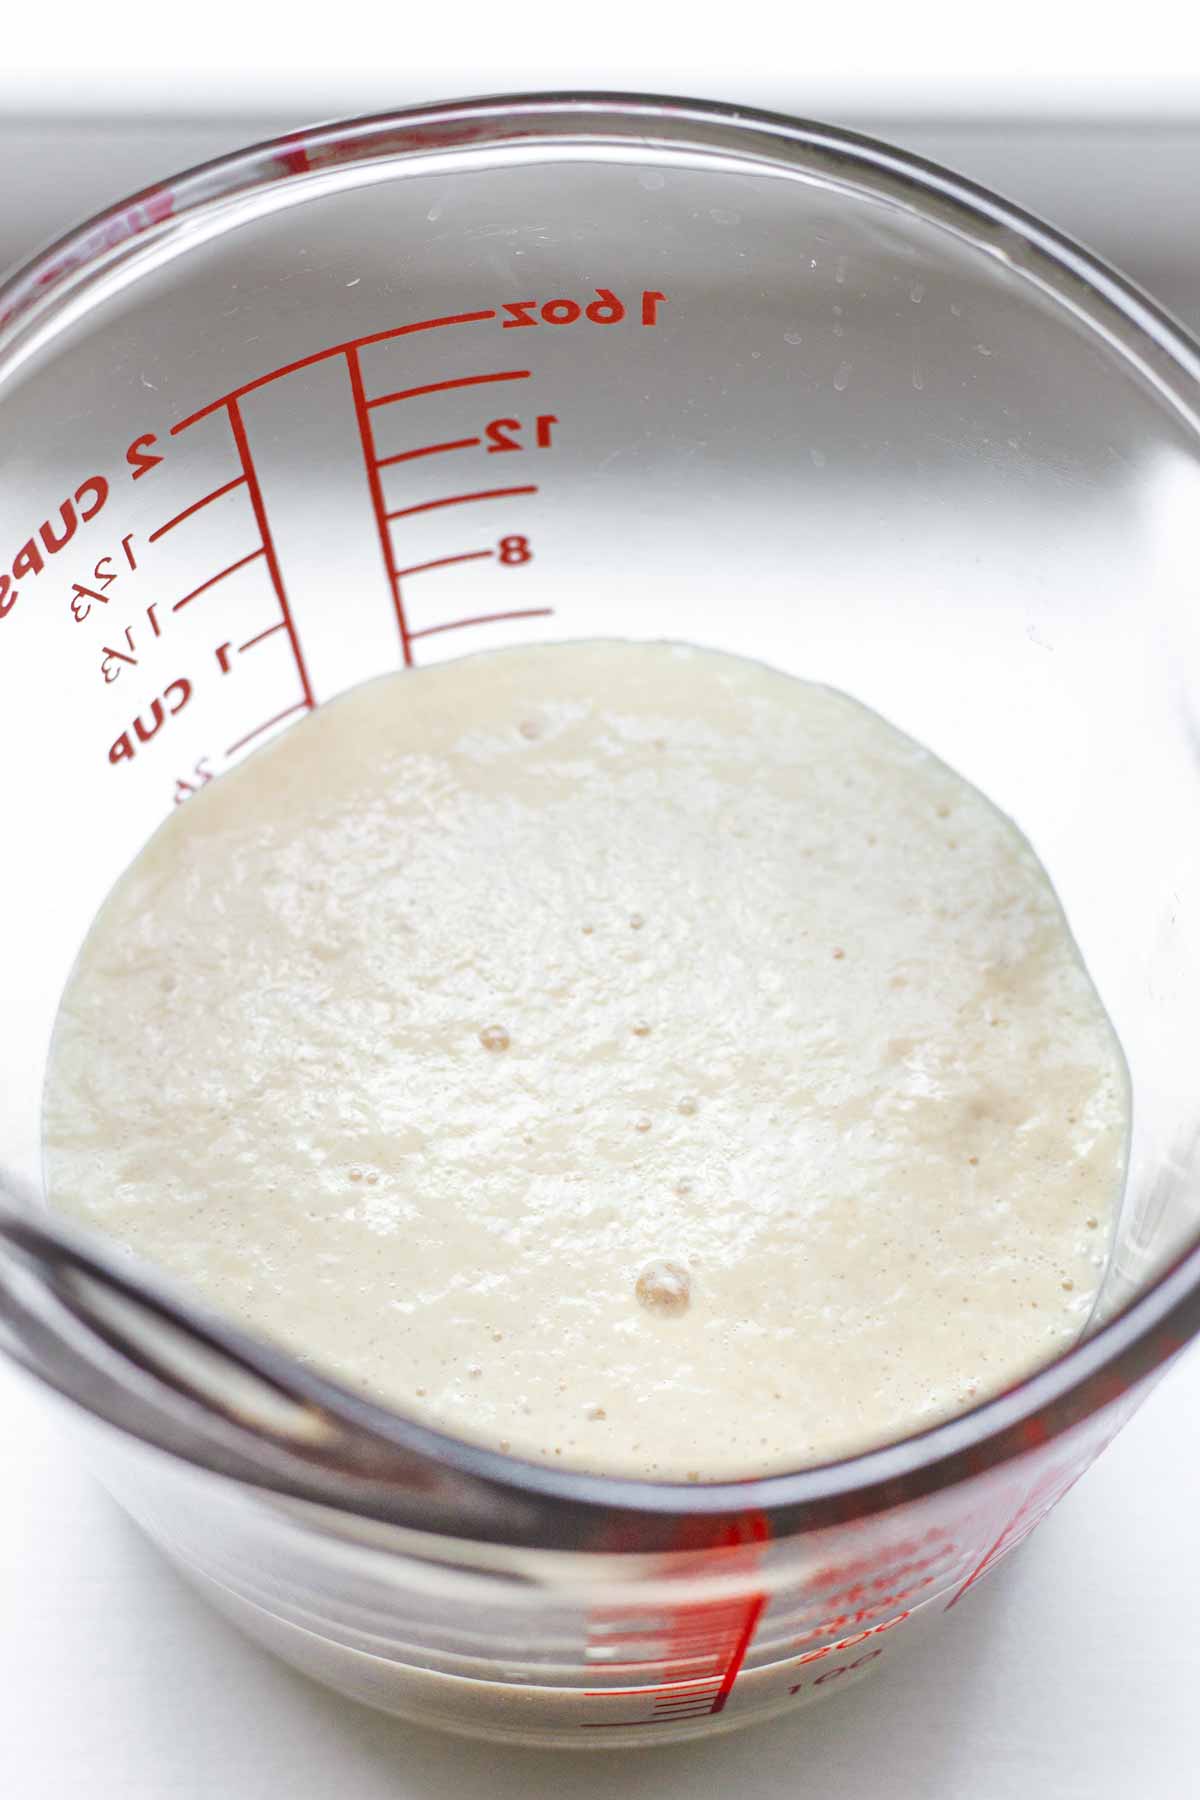 proofing yeast in a glass measuring cup